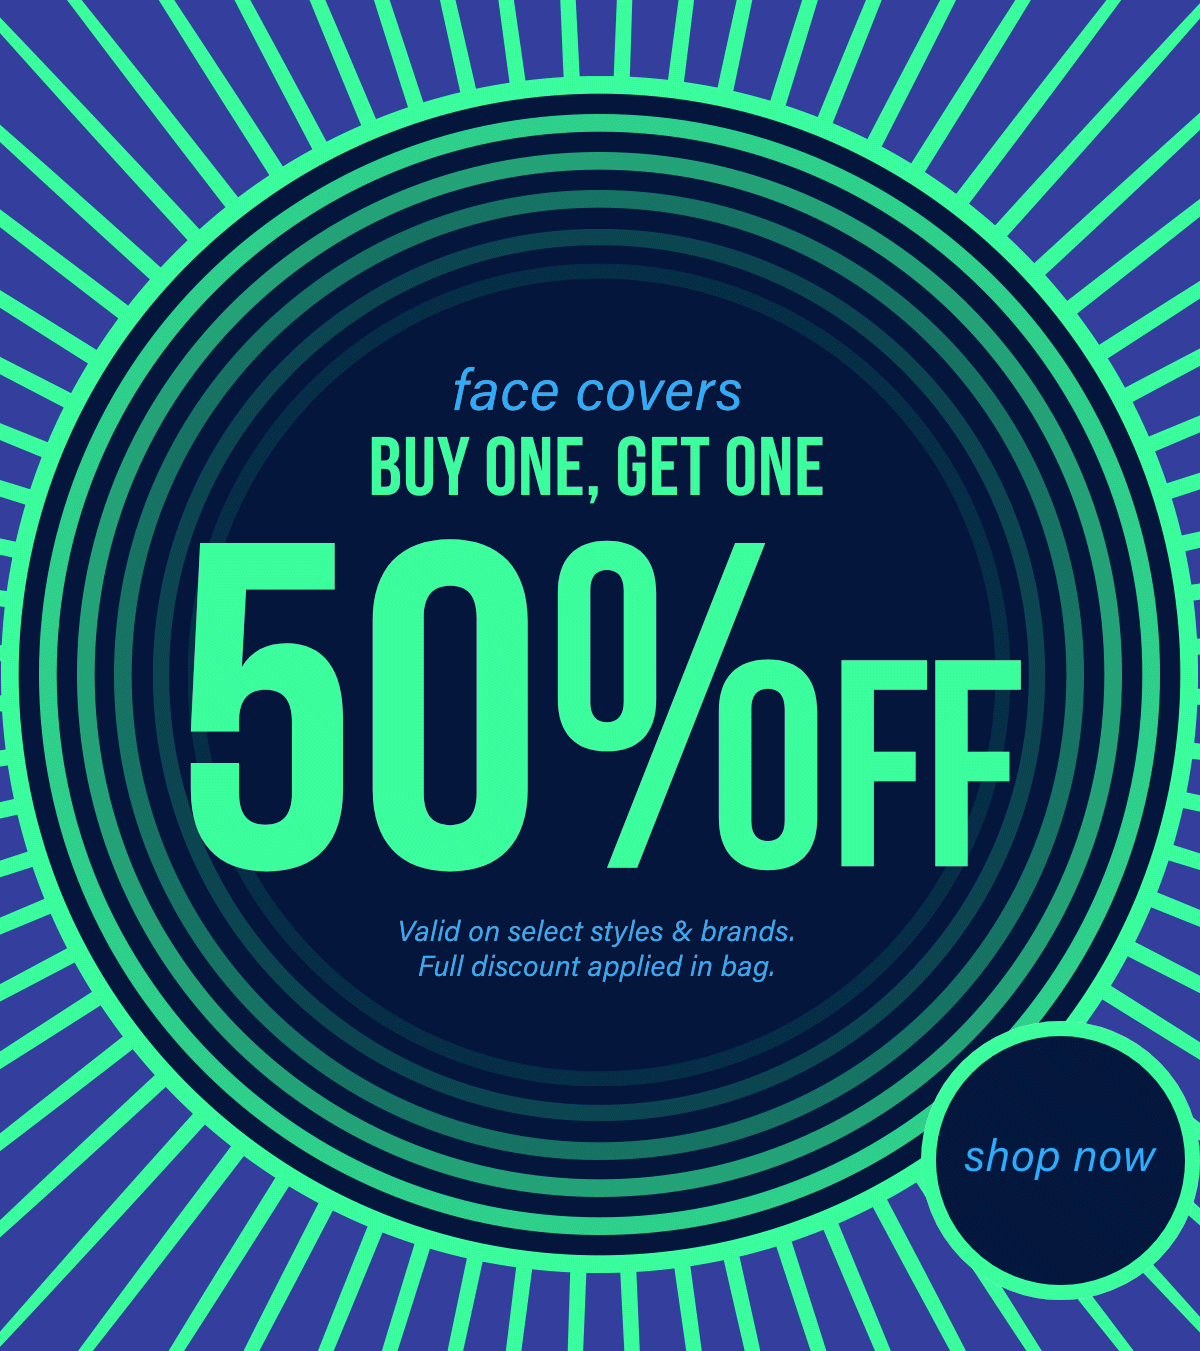 SALE FACE COVERS - BUY 1, GET 1 50% OFF